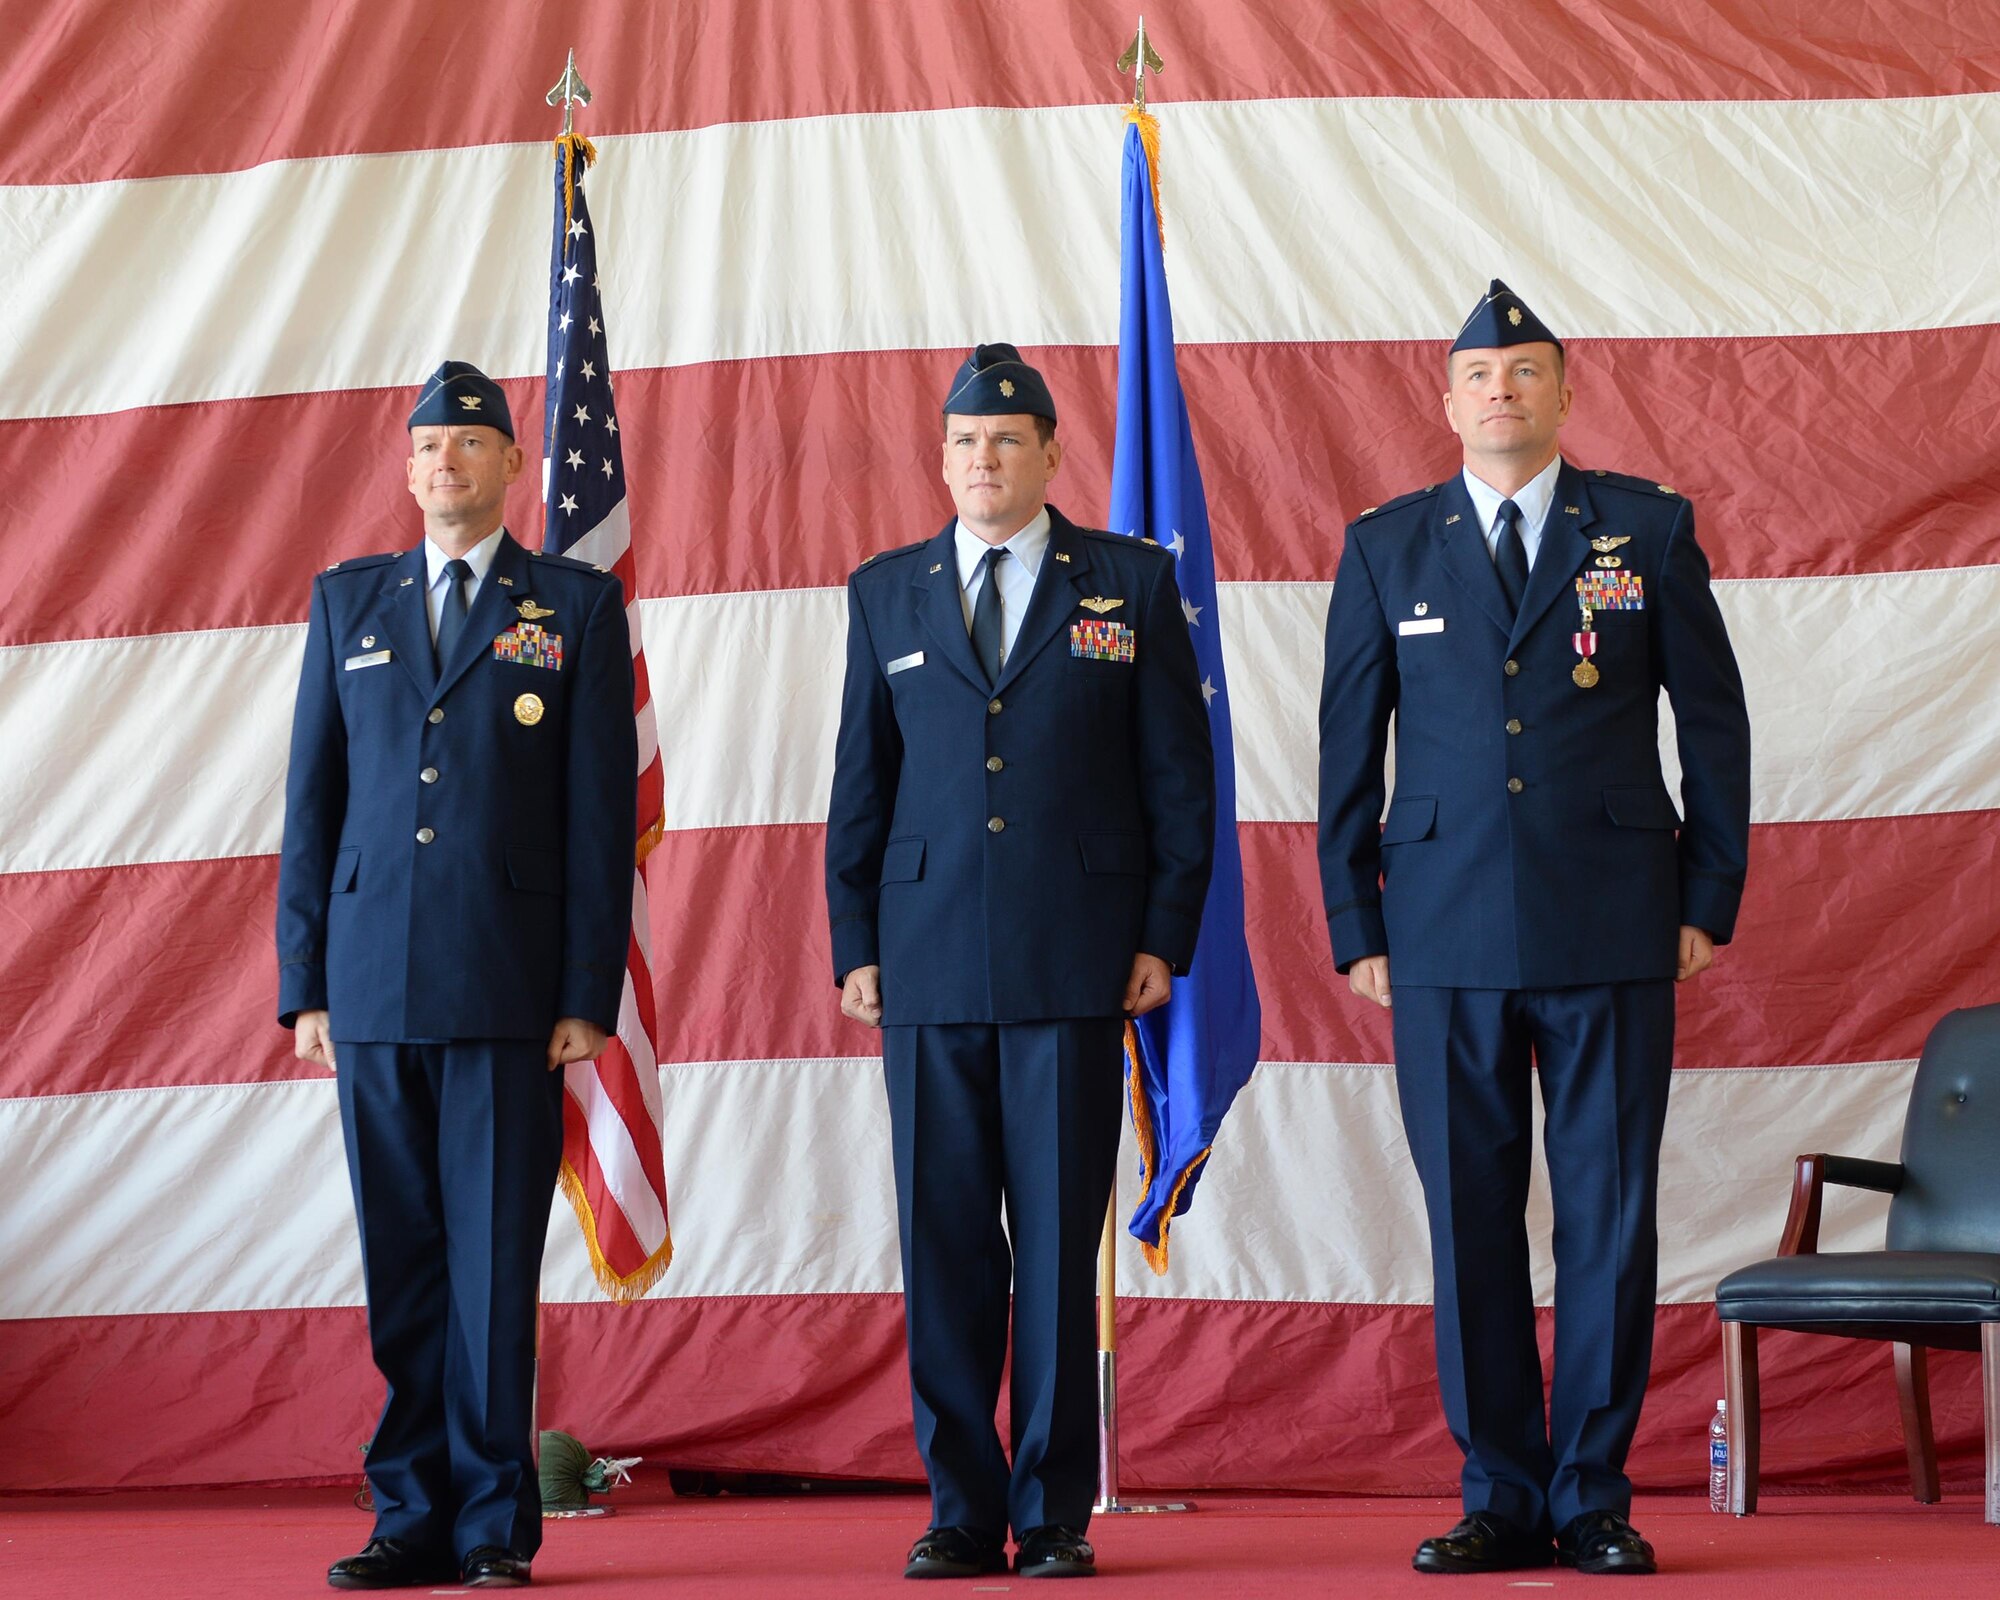 From left to right, Col. Christopher Niemi, 33rd Fighter Wing Operations Group commander, Lt. Col. Keith McGuire, incoming 337th Air Control Squadron commander, and Lt. Col. Michael Hagan, outgoing 337th ACS commander, stand at attention during the 337th ACS change of command Ceremony at Tyndall Air Force Base, Fla., May 5, 2016. The 337th ACS is a geographically seperated unit assigned to the 33rd FW/OG at Eglin AFB, Fla., operating out of Tyndall AFB. Not only is the squadron's primary responsibility to train air battle officers, they also provide command and control support for the F-22 Raptor initial and transition training. (U.S. Air Force photo/Airman 1st Class Cody R. Miller)